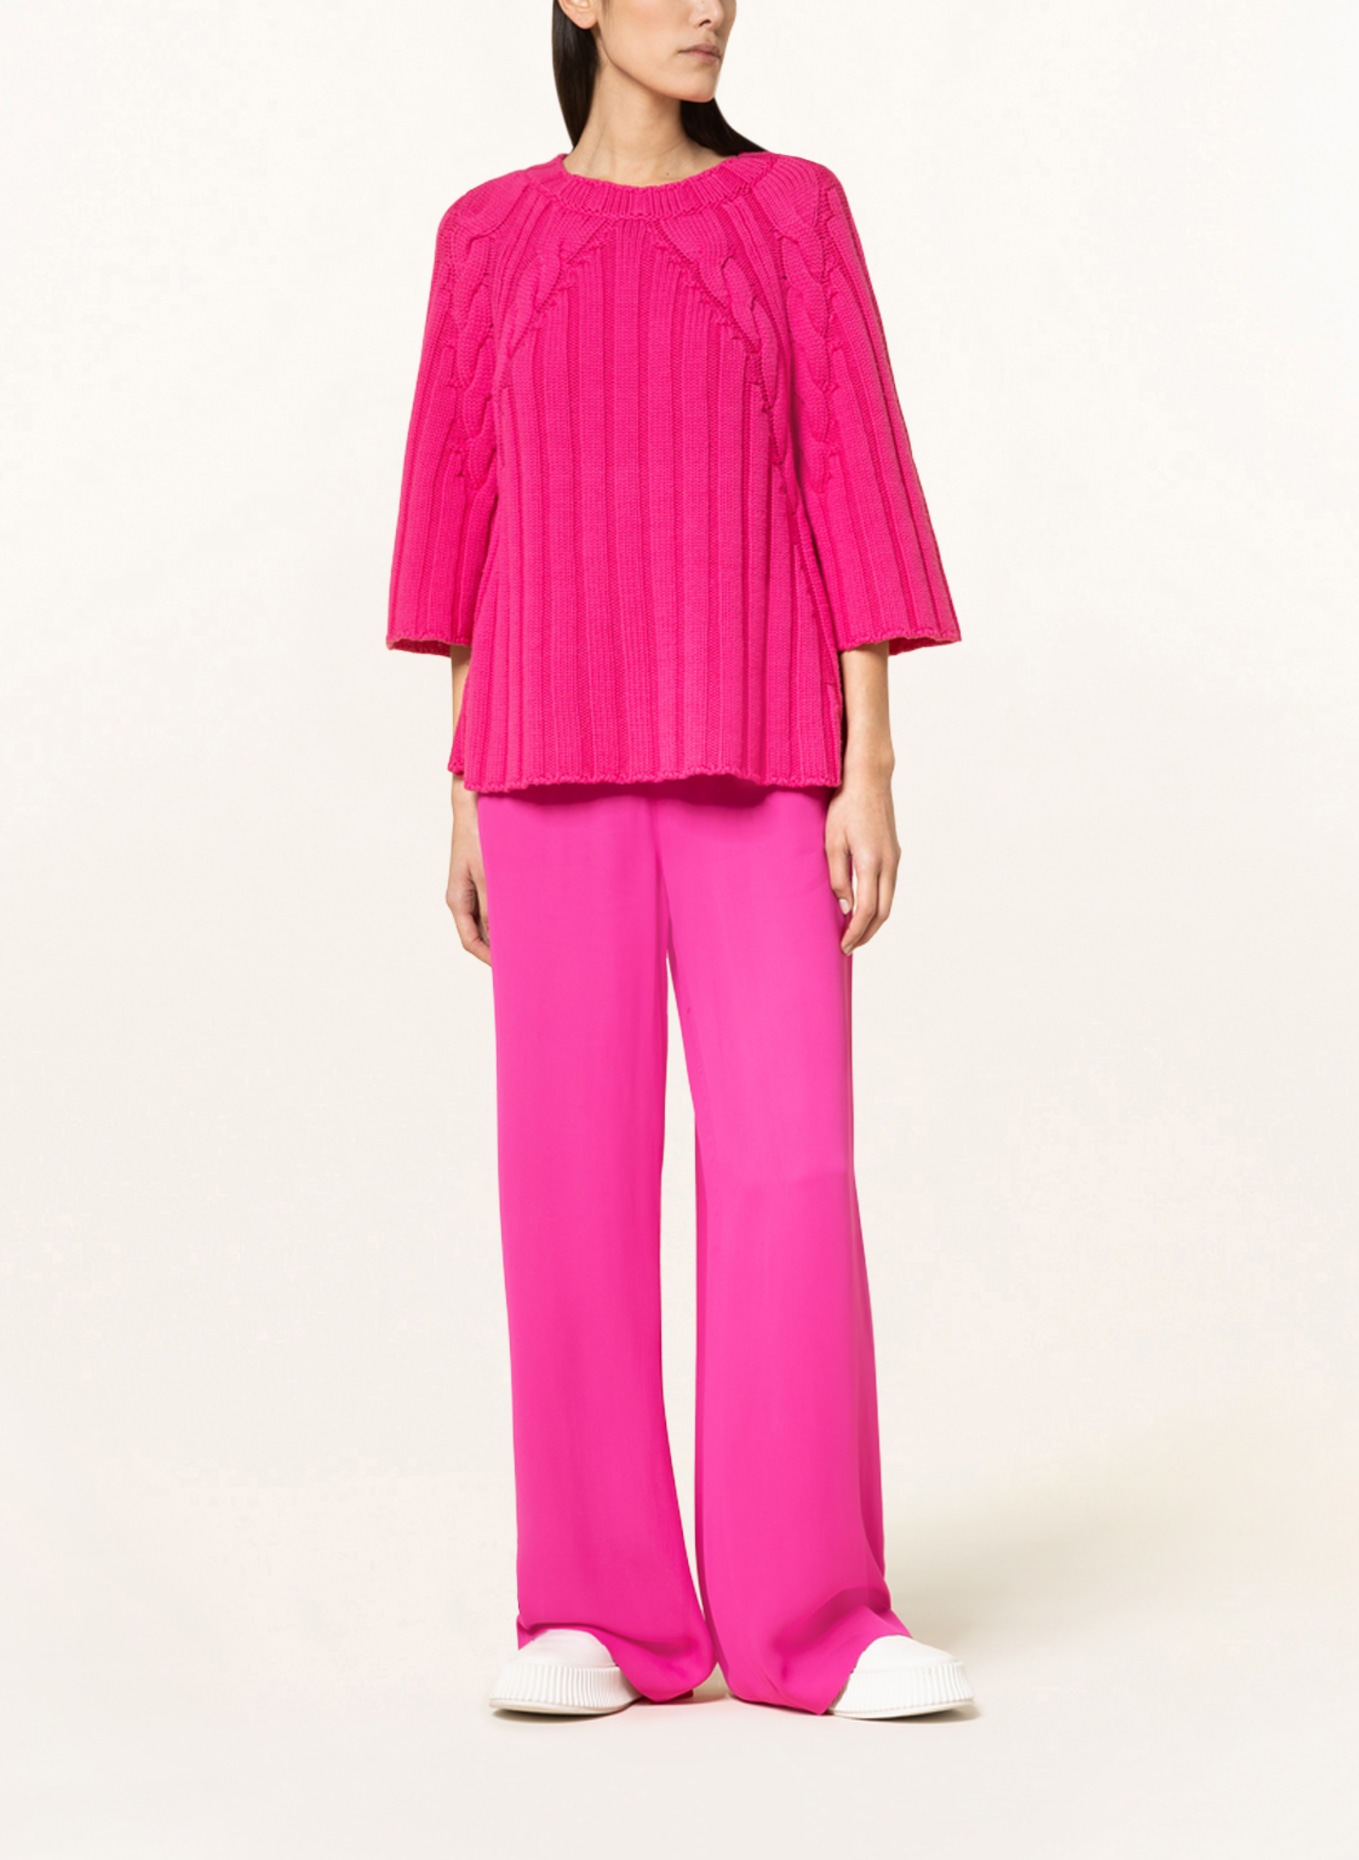 FABIANA FILIPPI Sweater made of merino wool with 3/4 sleeves, Color: PINK (Image 2)